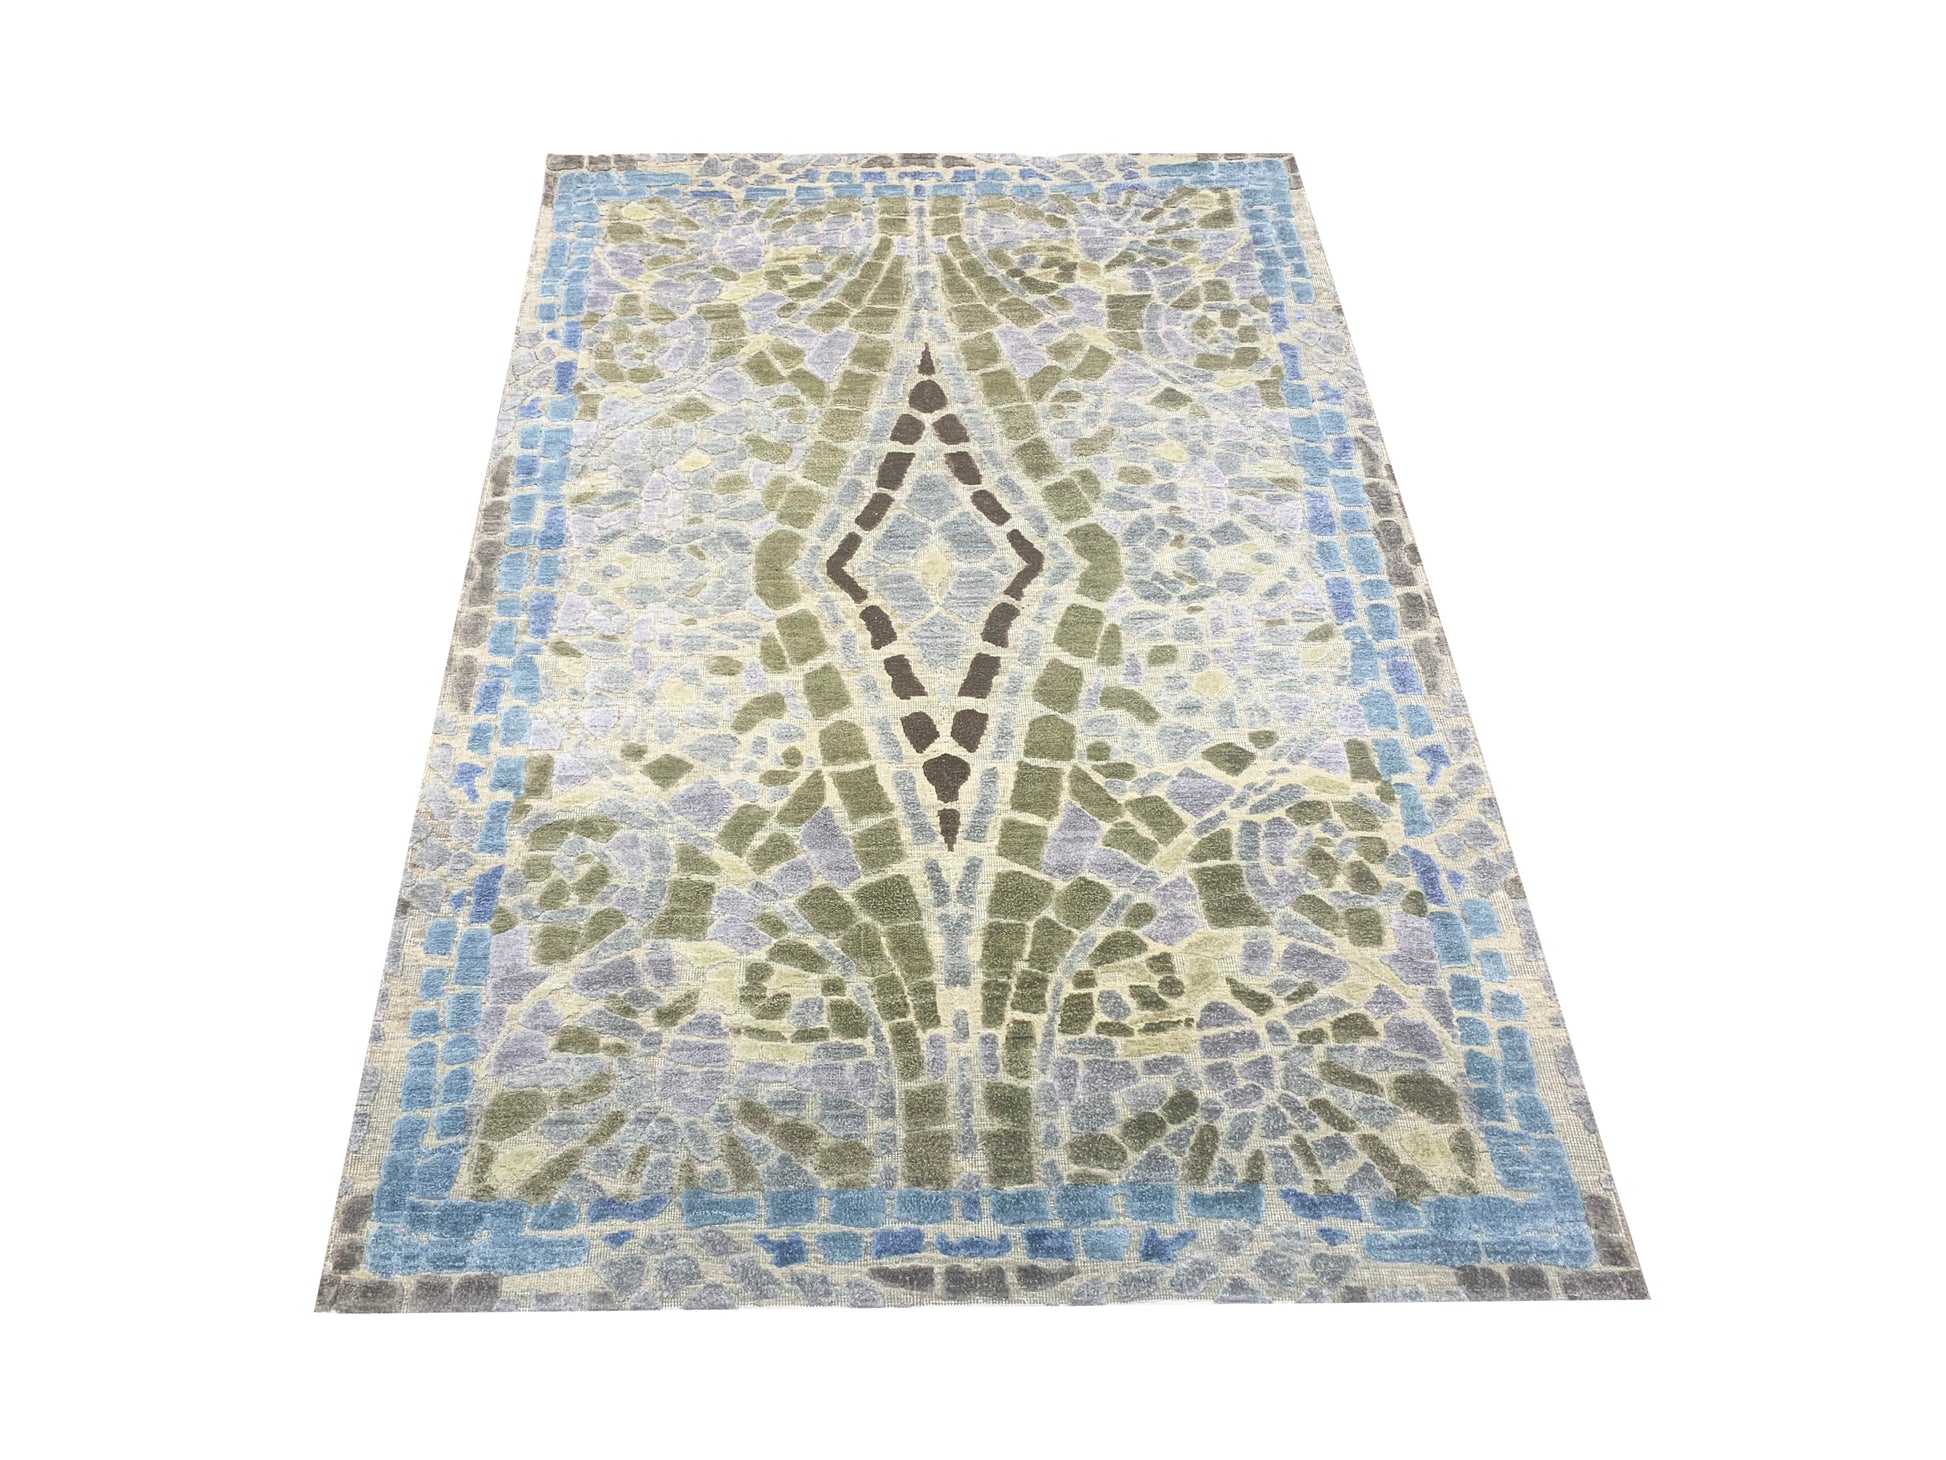 Get trendy with Grey Multi Silk Wool Modern Handknotted Area Rug 4.0x6.1ft 122x185Cms - Modern Rugs available at Jaipur Oriental Rugs. Grab yours for $1315.00 today!